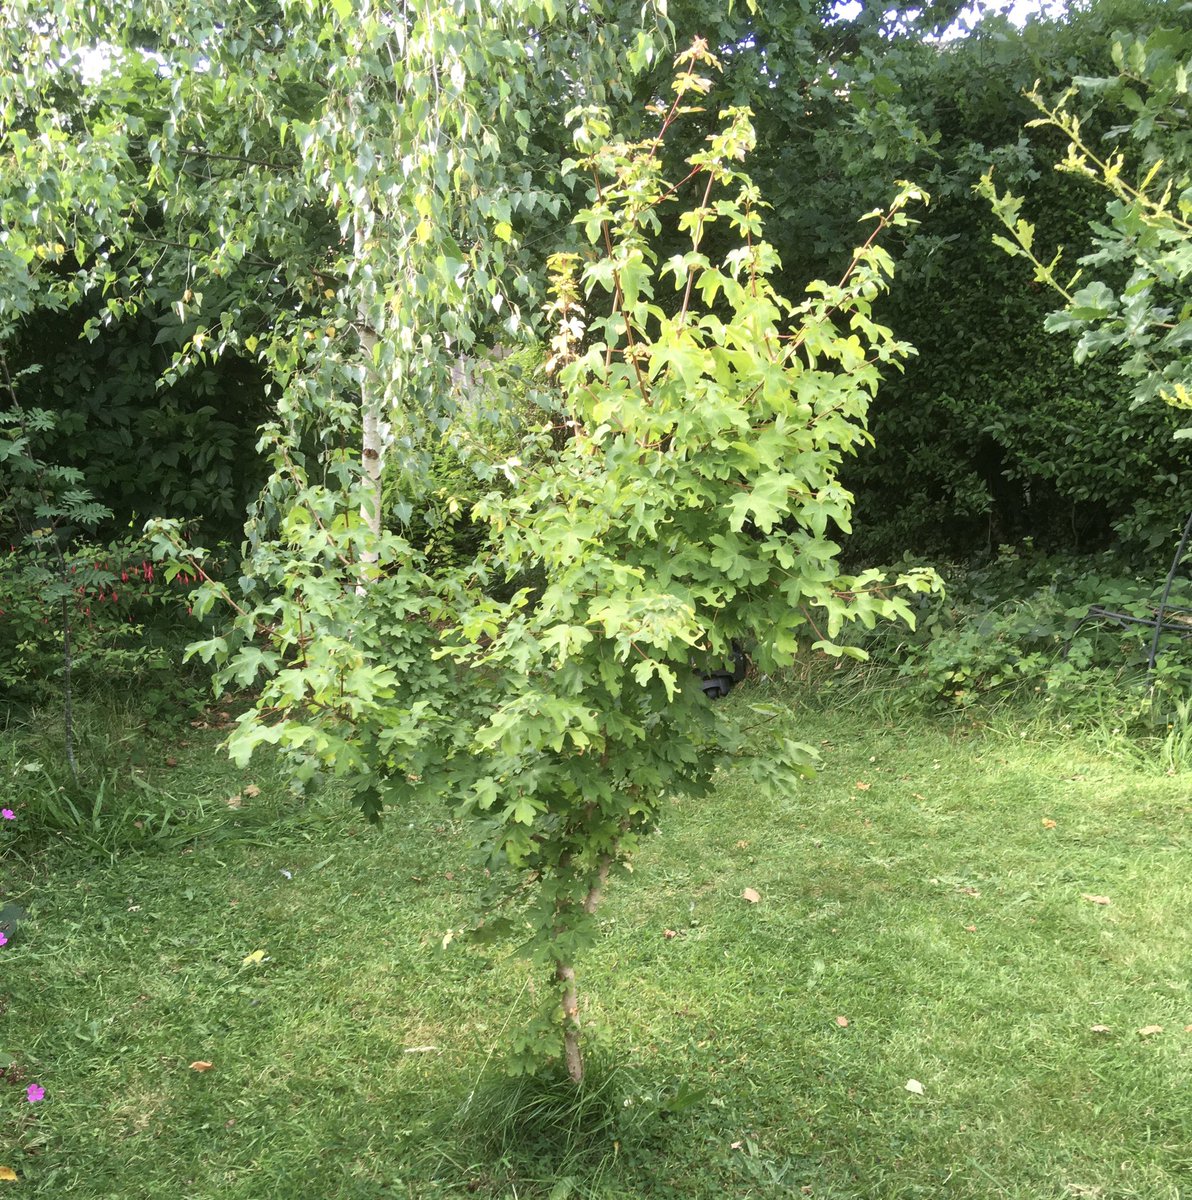  @Penrhynbirder  @jonniprice  @RSPBConwy here’s a little nature conservation timeline story. In 2014 I planted some native trees in my garden, one was a field maple. The little tree has grown well, and today I noticed it had become a resource for leaf-cutter bees.